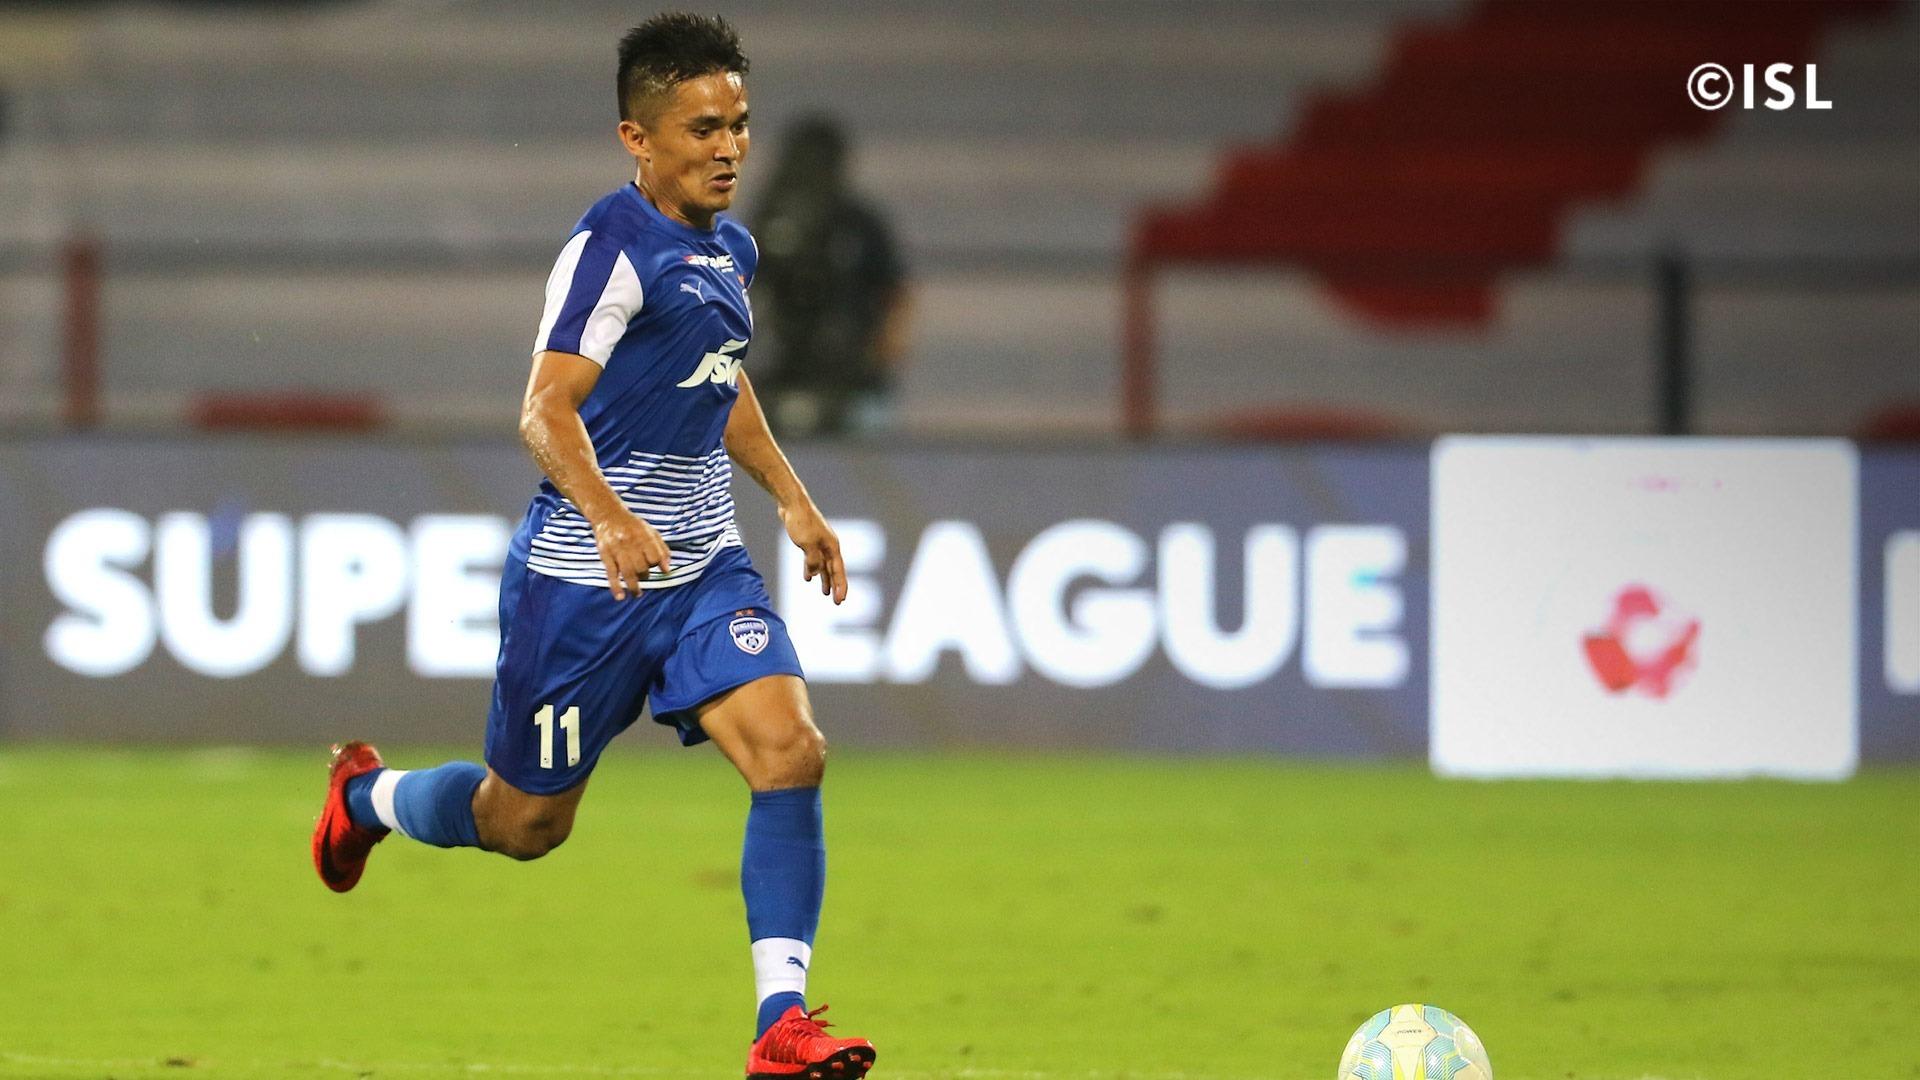 Sunil Chhetri: I did not celebrate as a mark of respect for playing